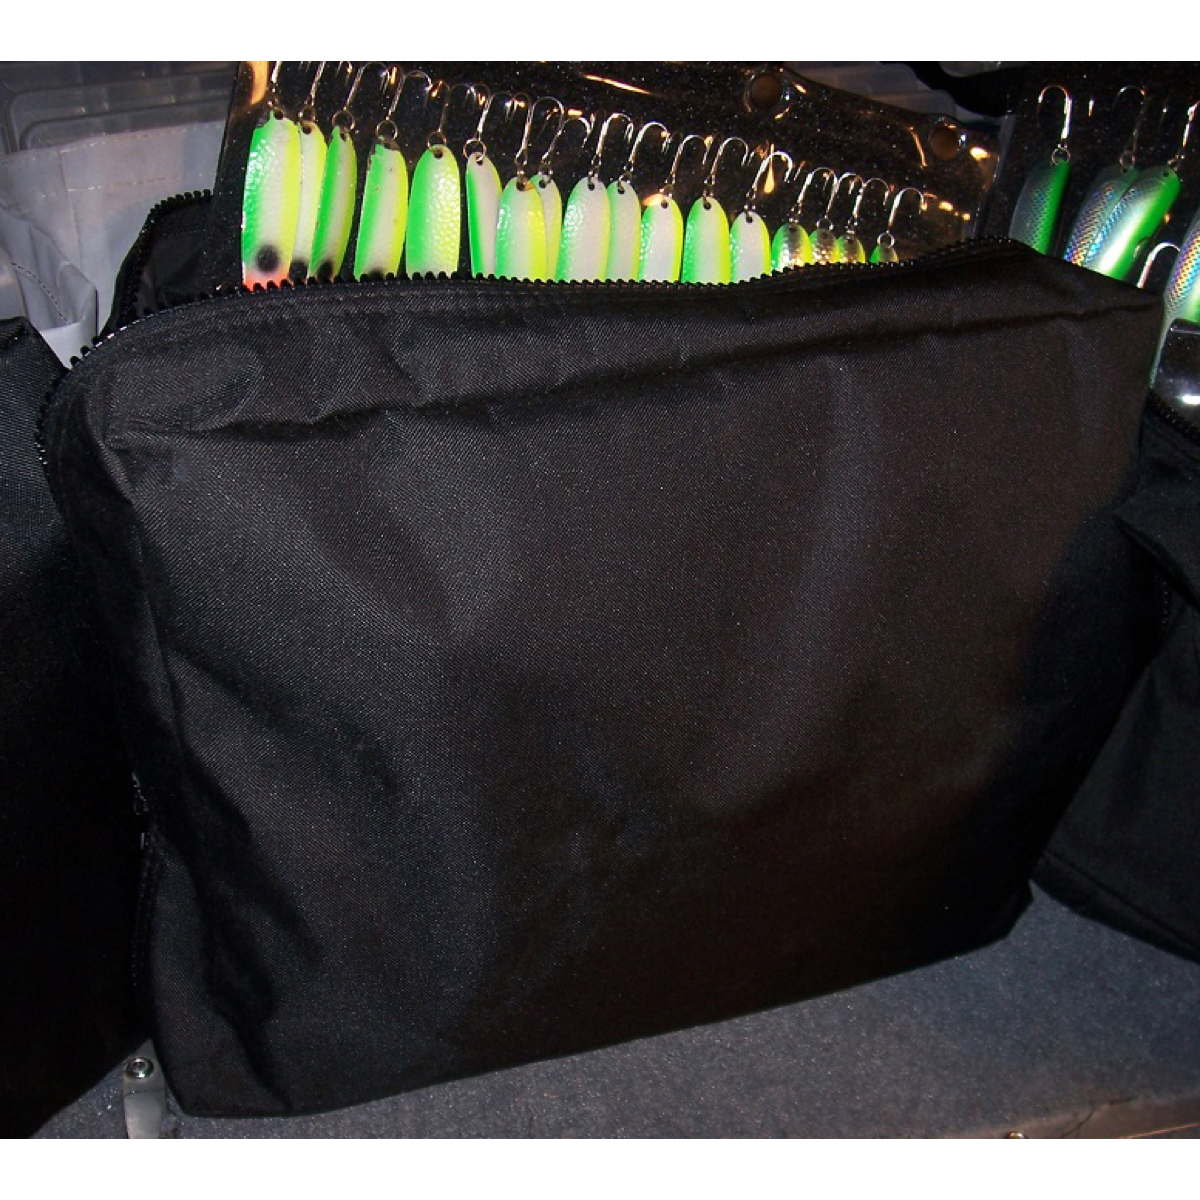 Photo of Kittrick Amish Spoon Pad Bag for sale at United Tackle Shops.